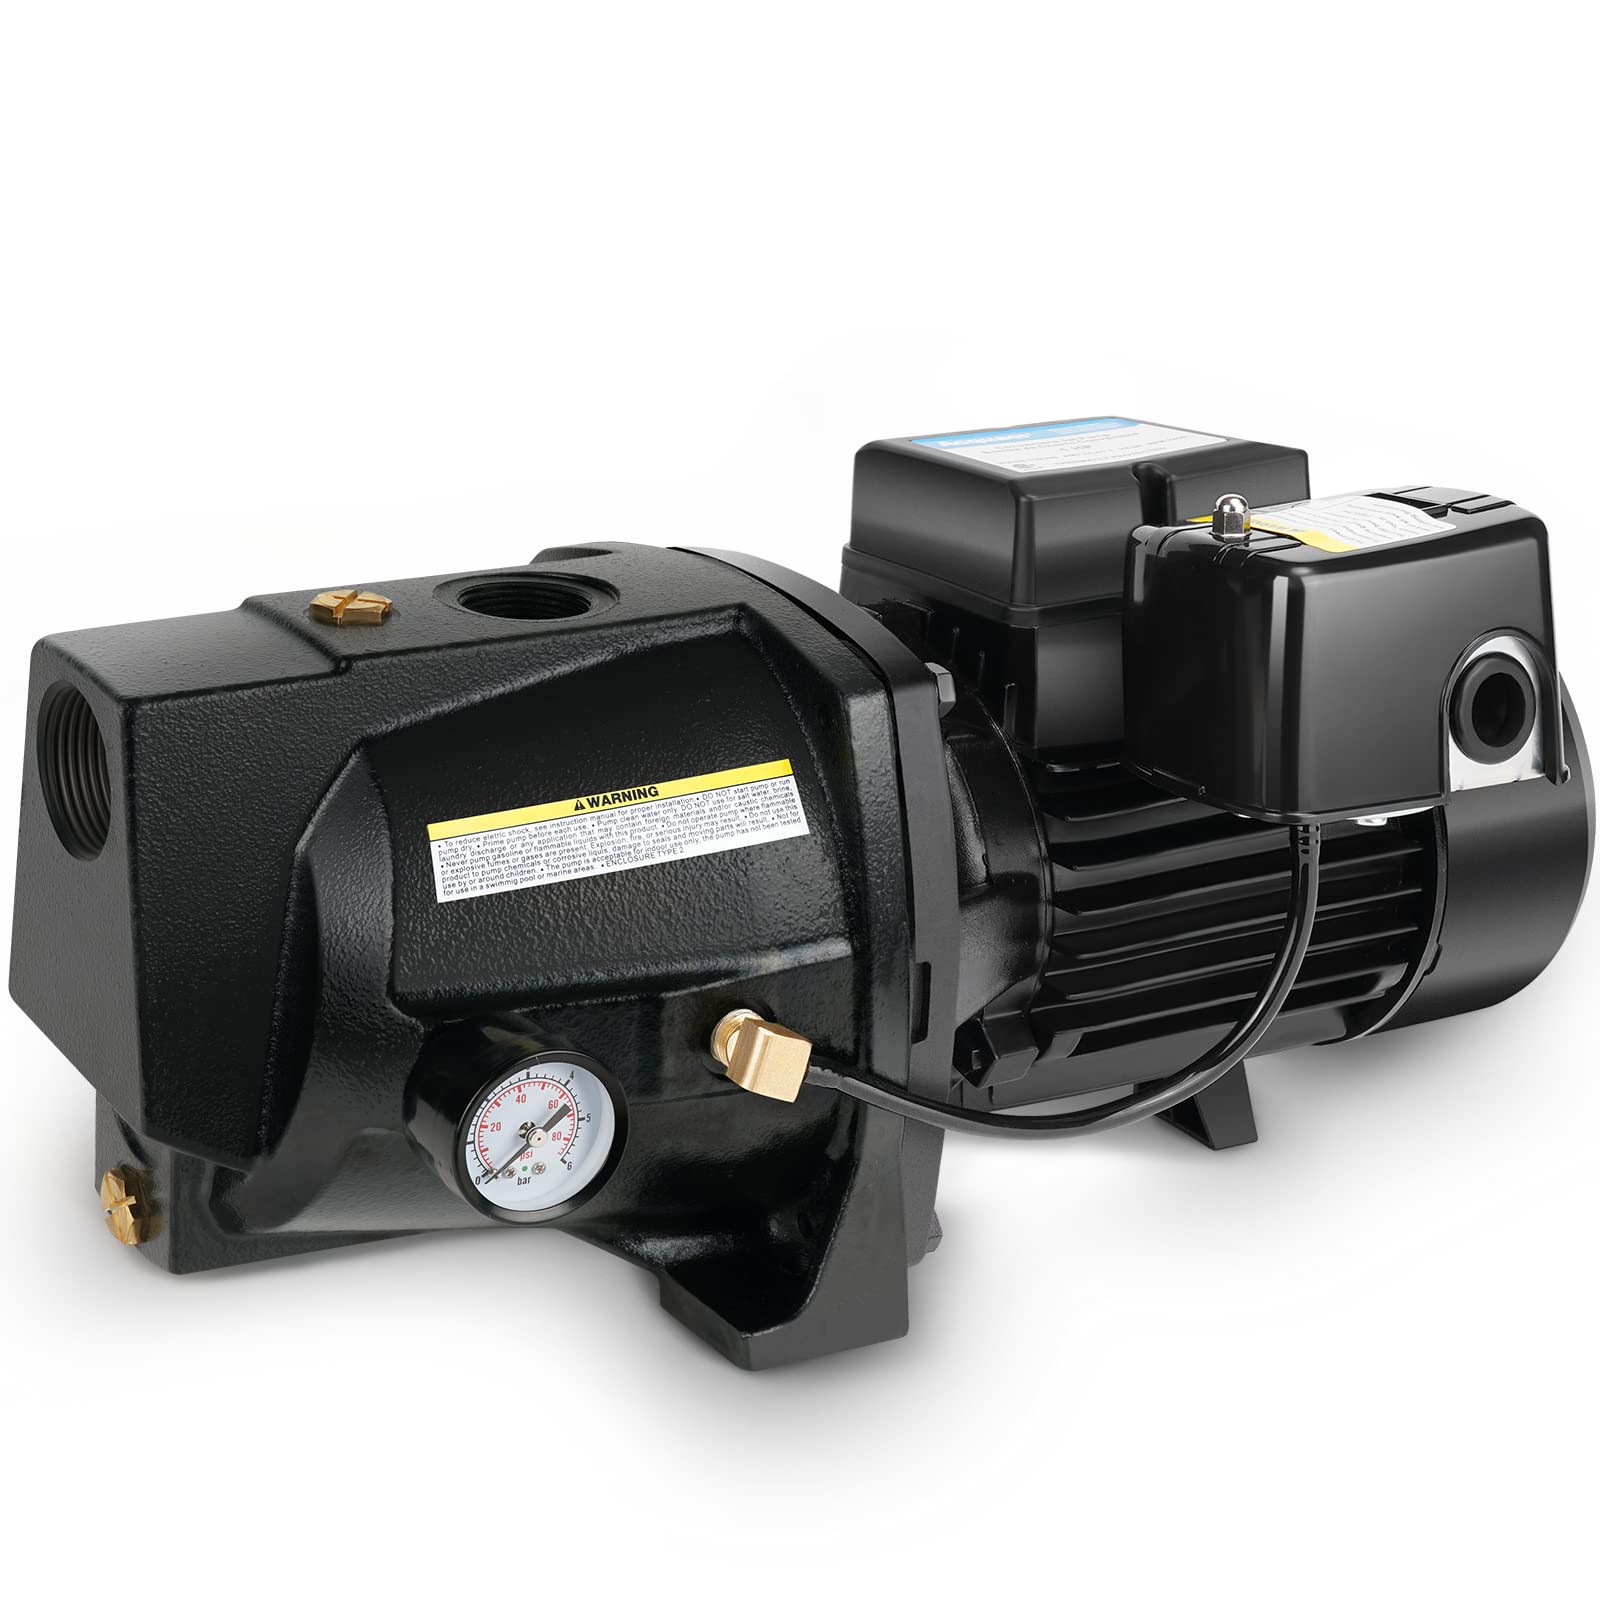 Acquaer 1HP Shallow Well Jet Pump, Well Depth Up to 25 ft - Acquaer